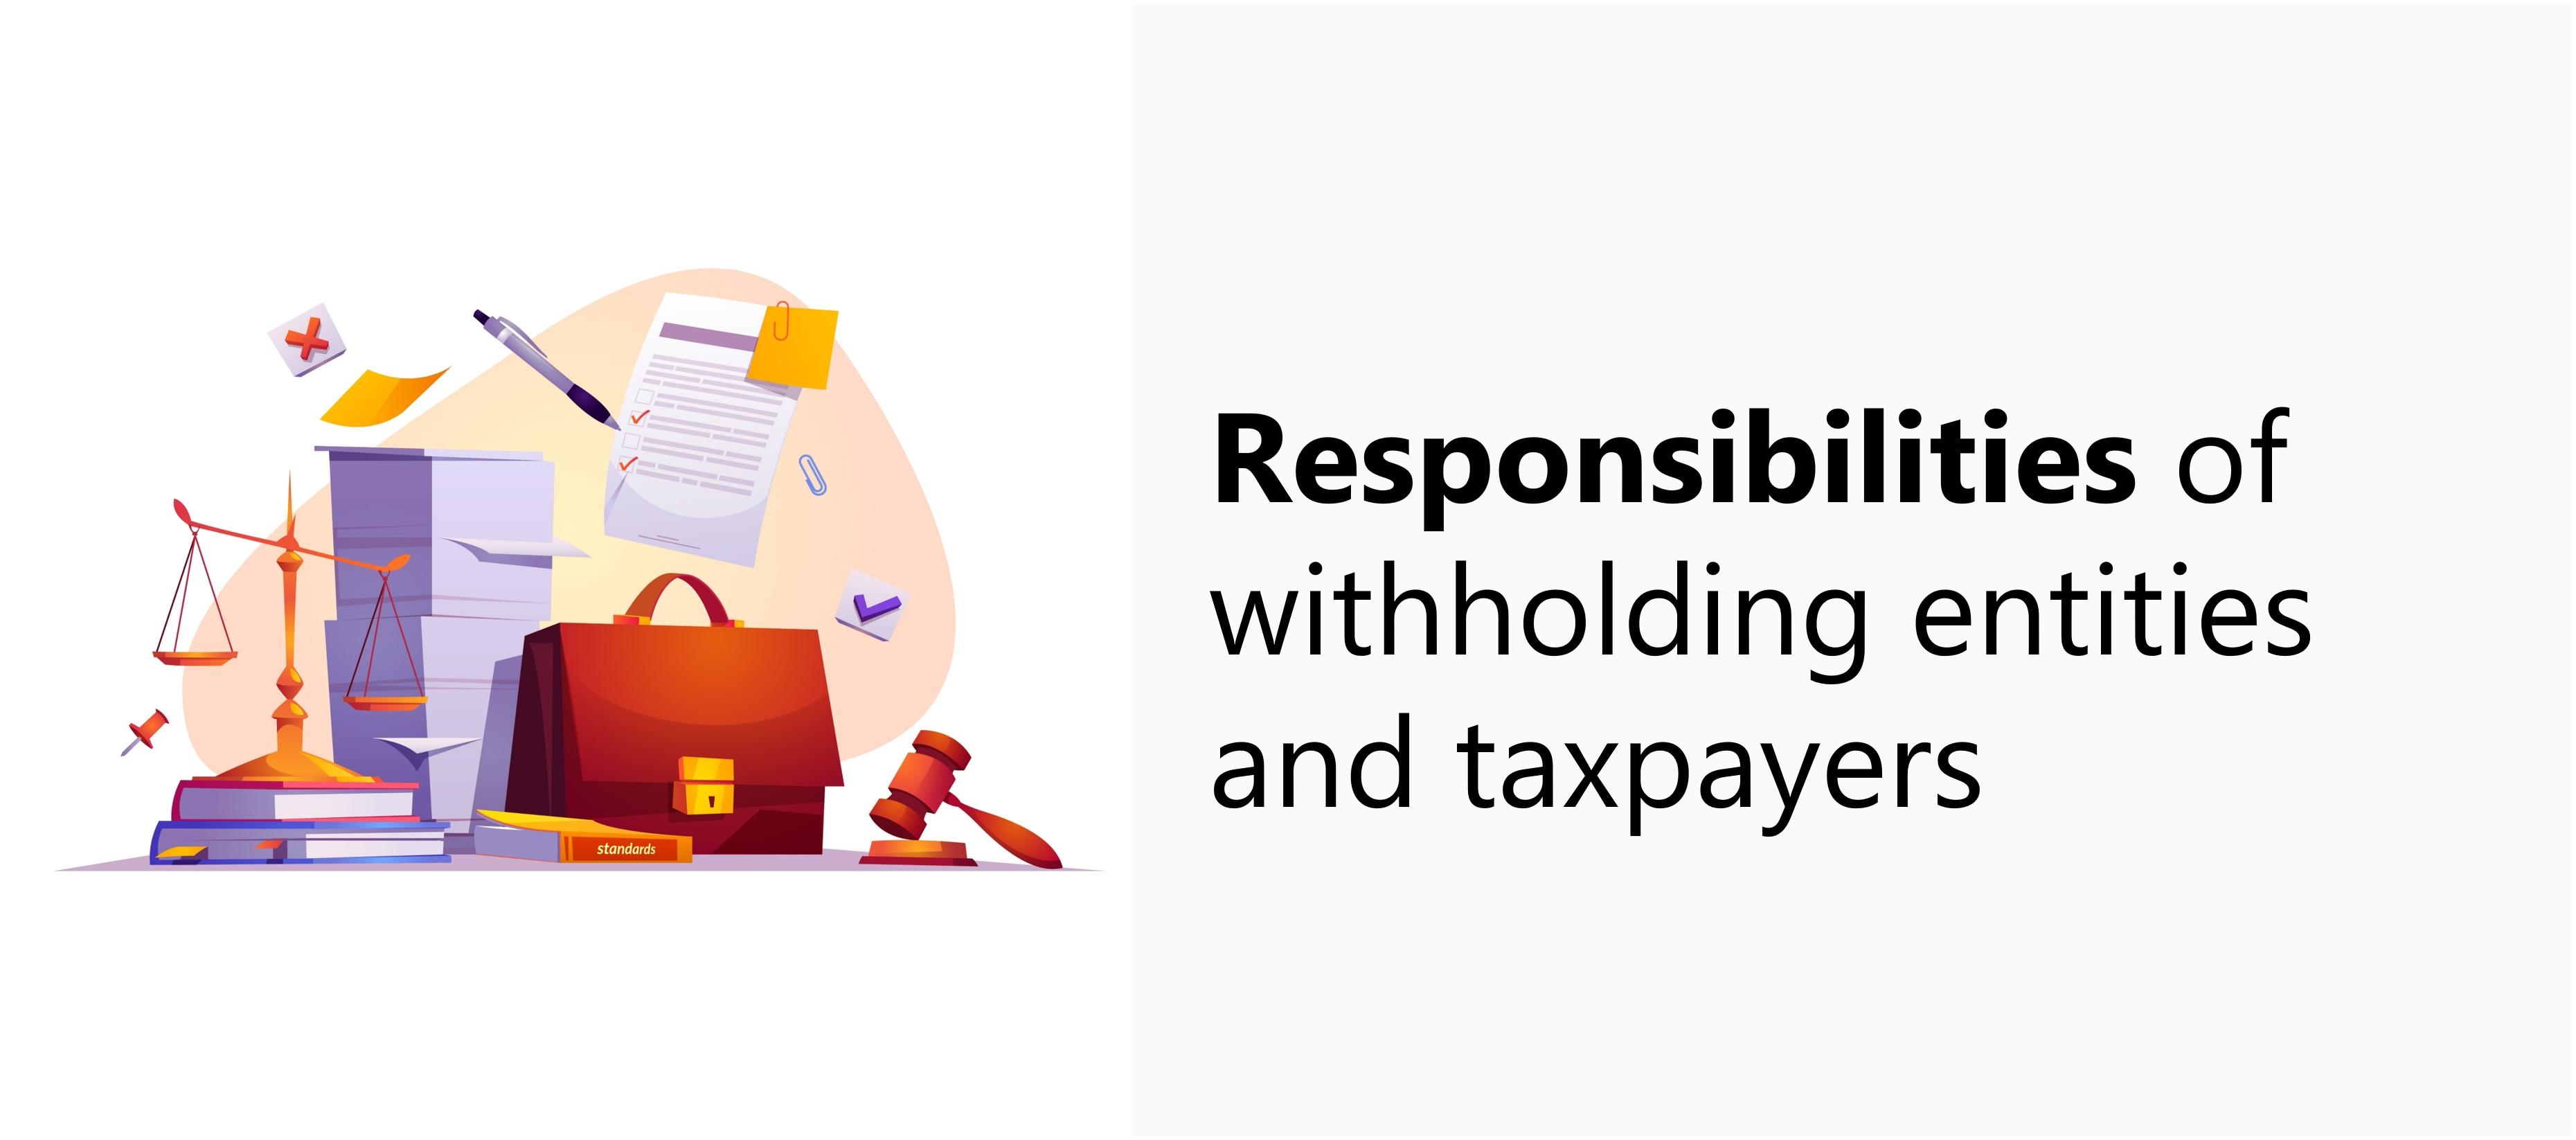 Responsibilities of withholding entities and taxpayers